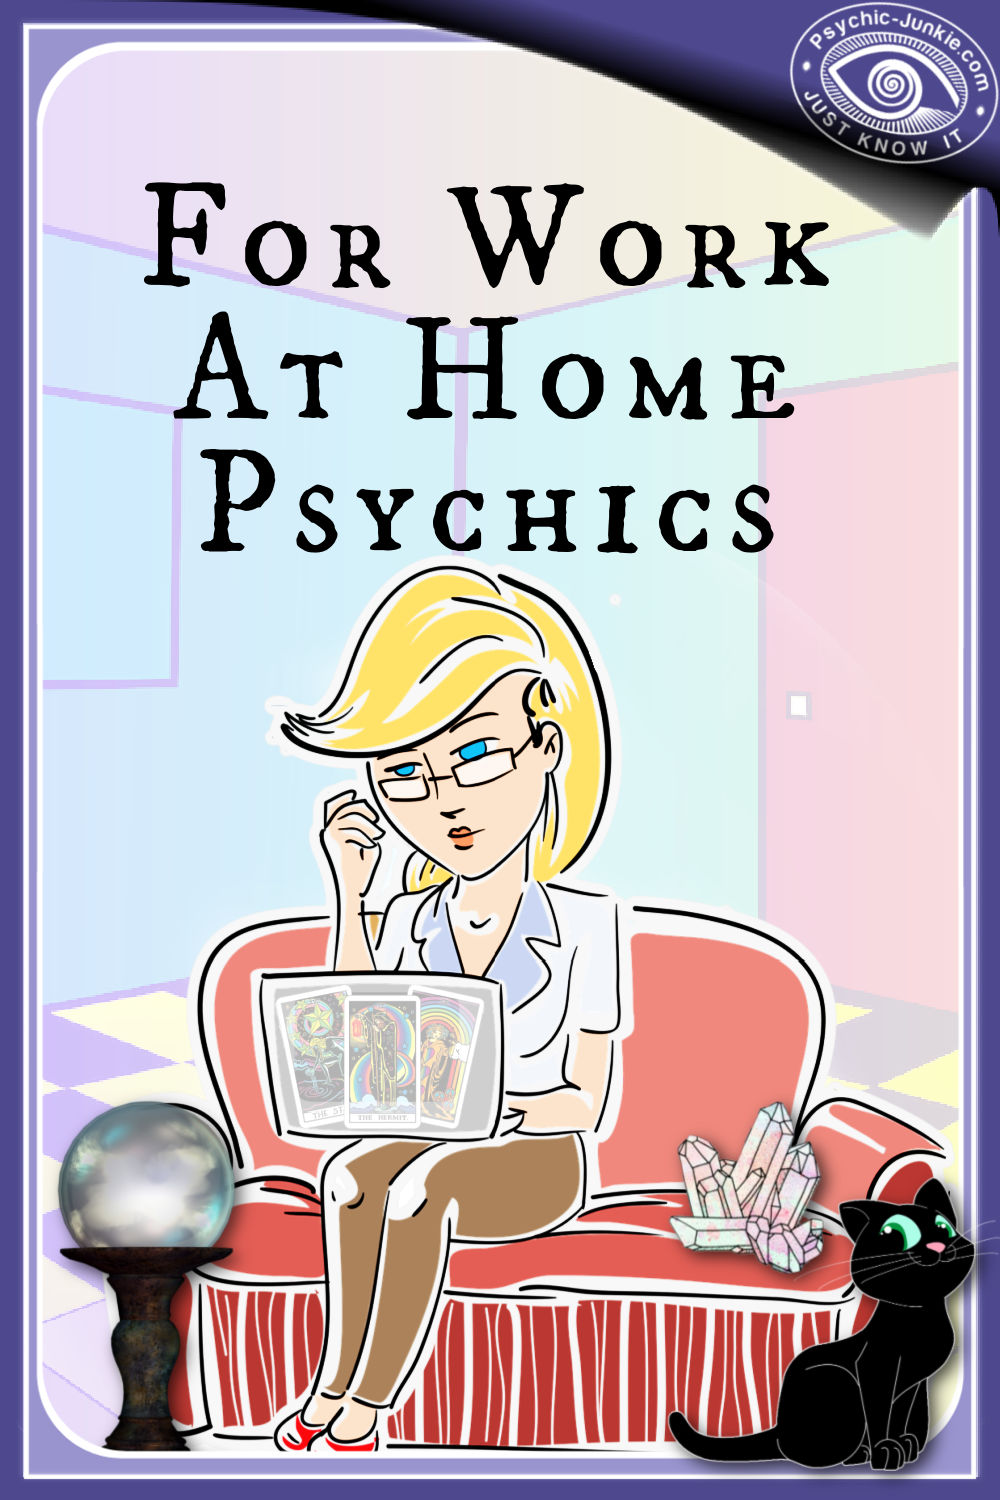 Finding Online Psychic Jobs And Learning How To Be Successful Freelancing From Home